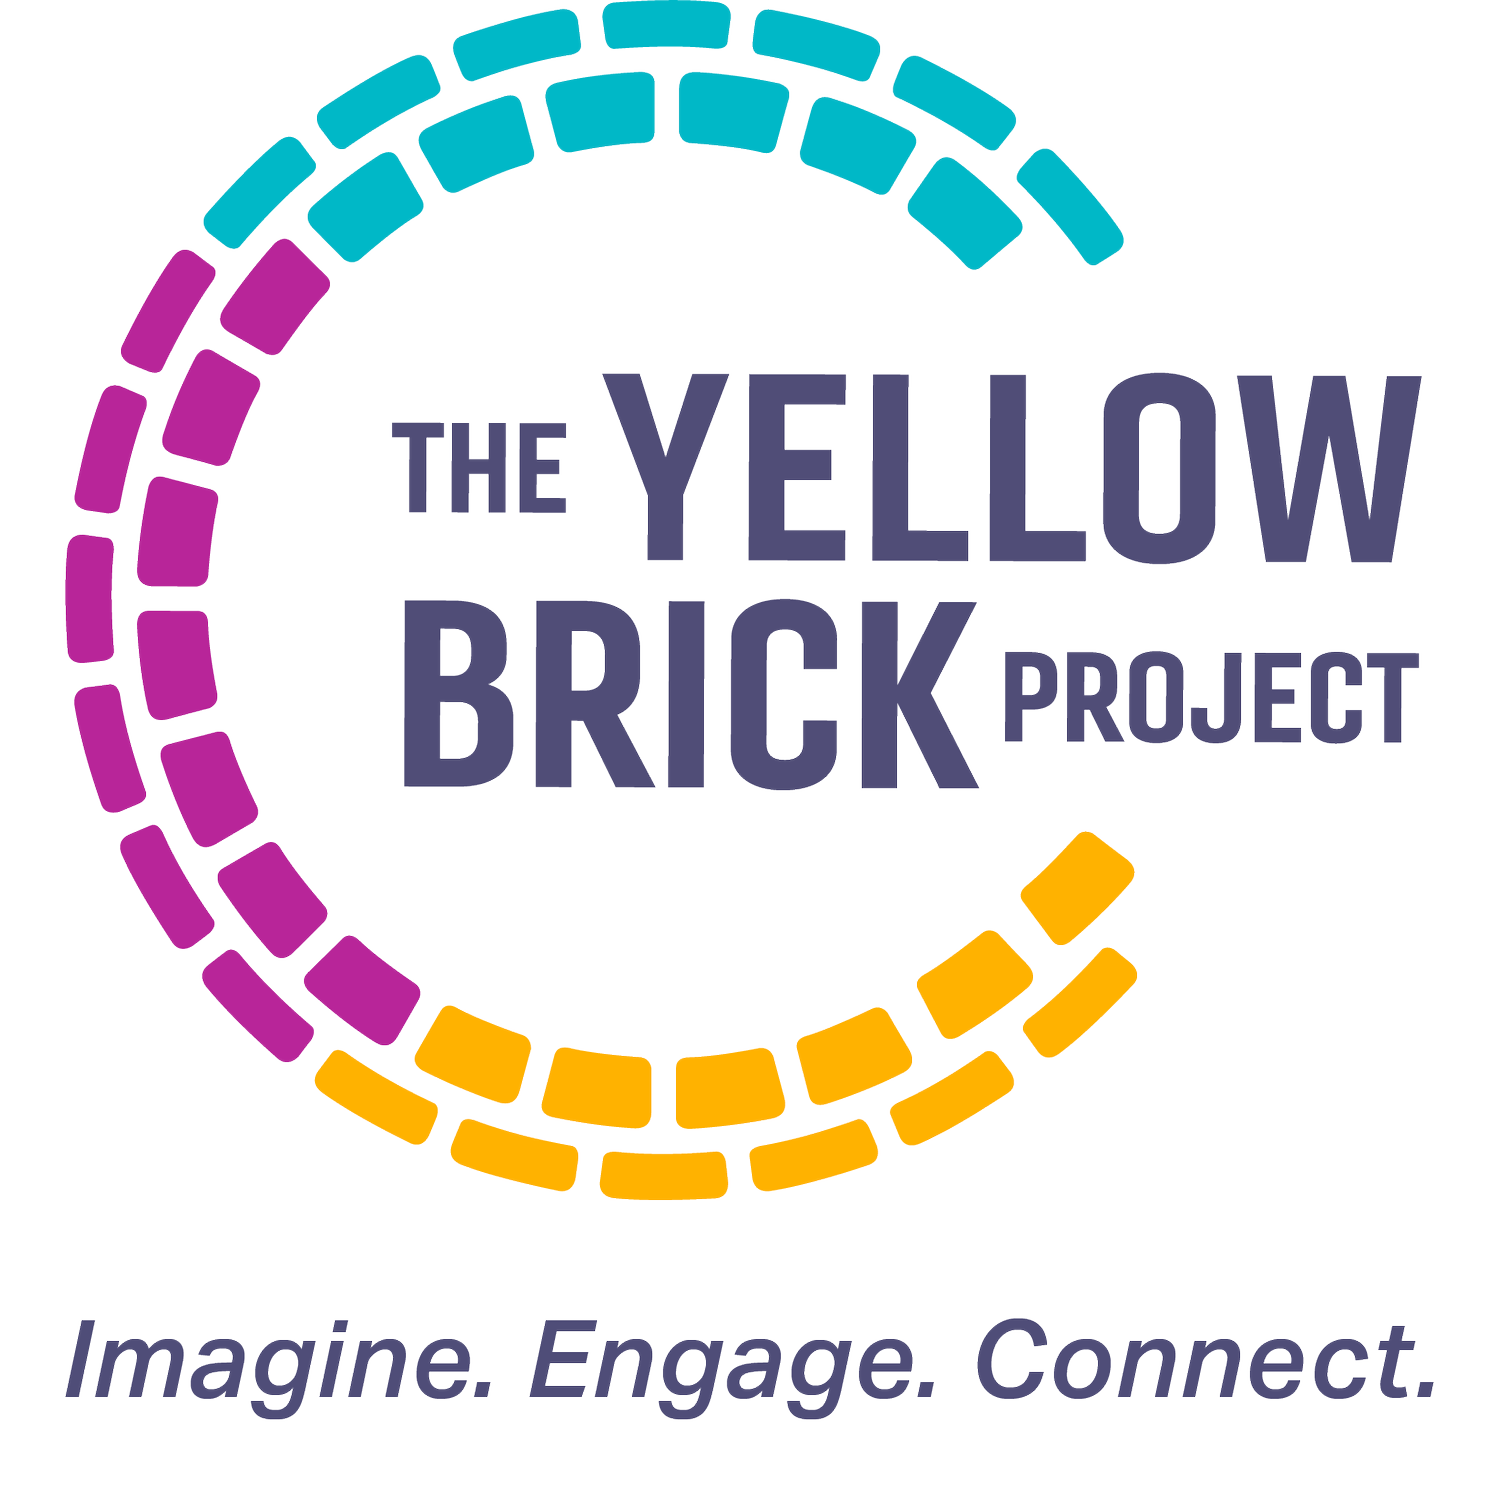 The Yellow Brick Project